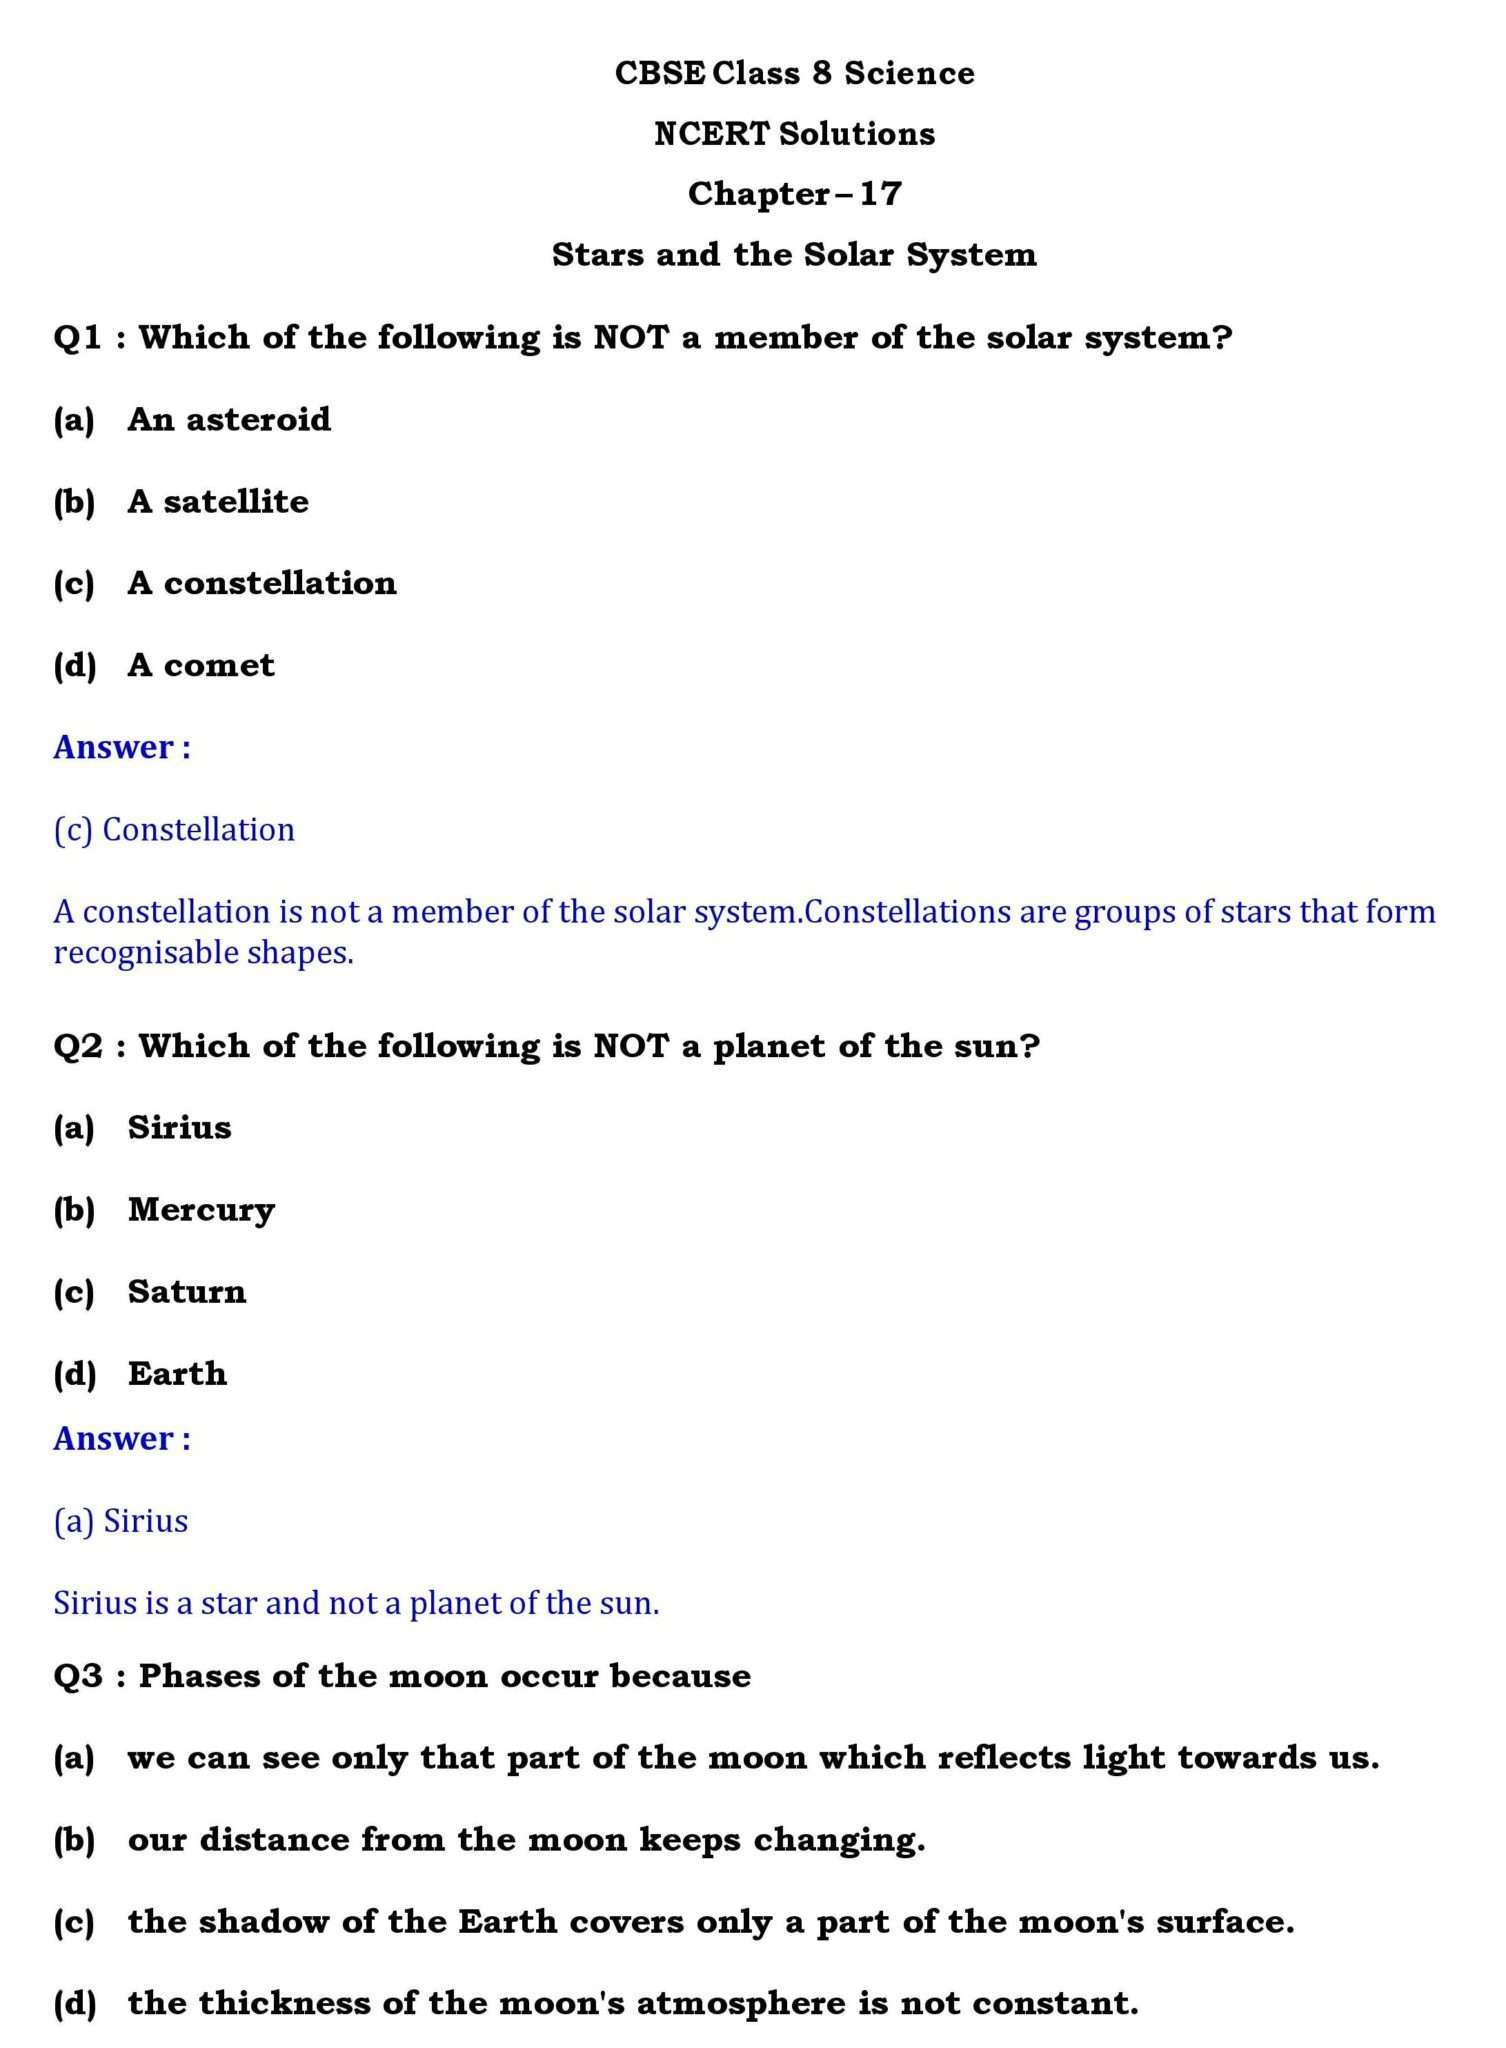 NCERT Solutions for Class 8 Science Chapter 17 page 001